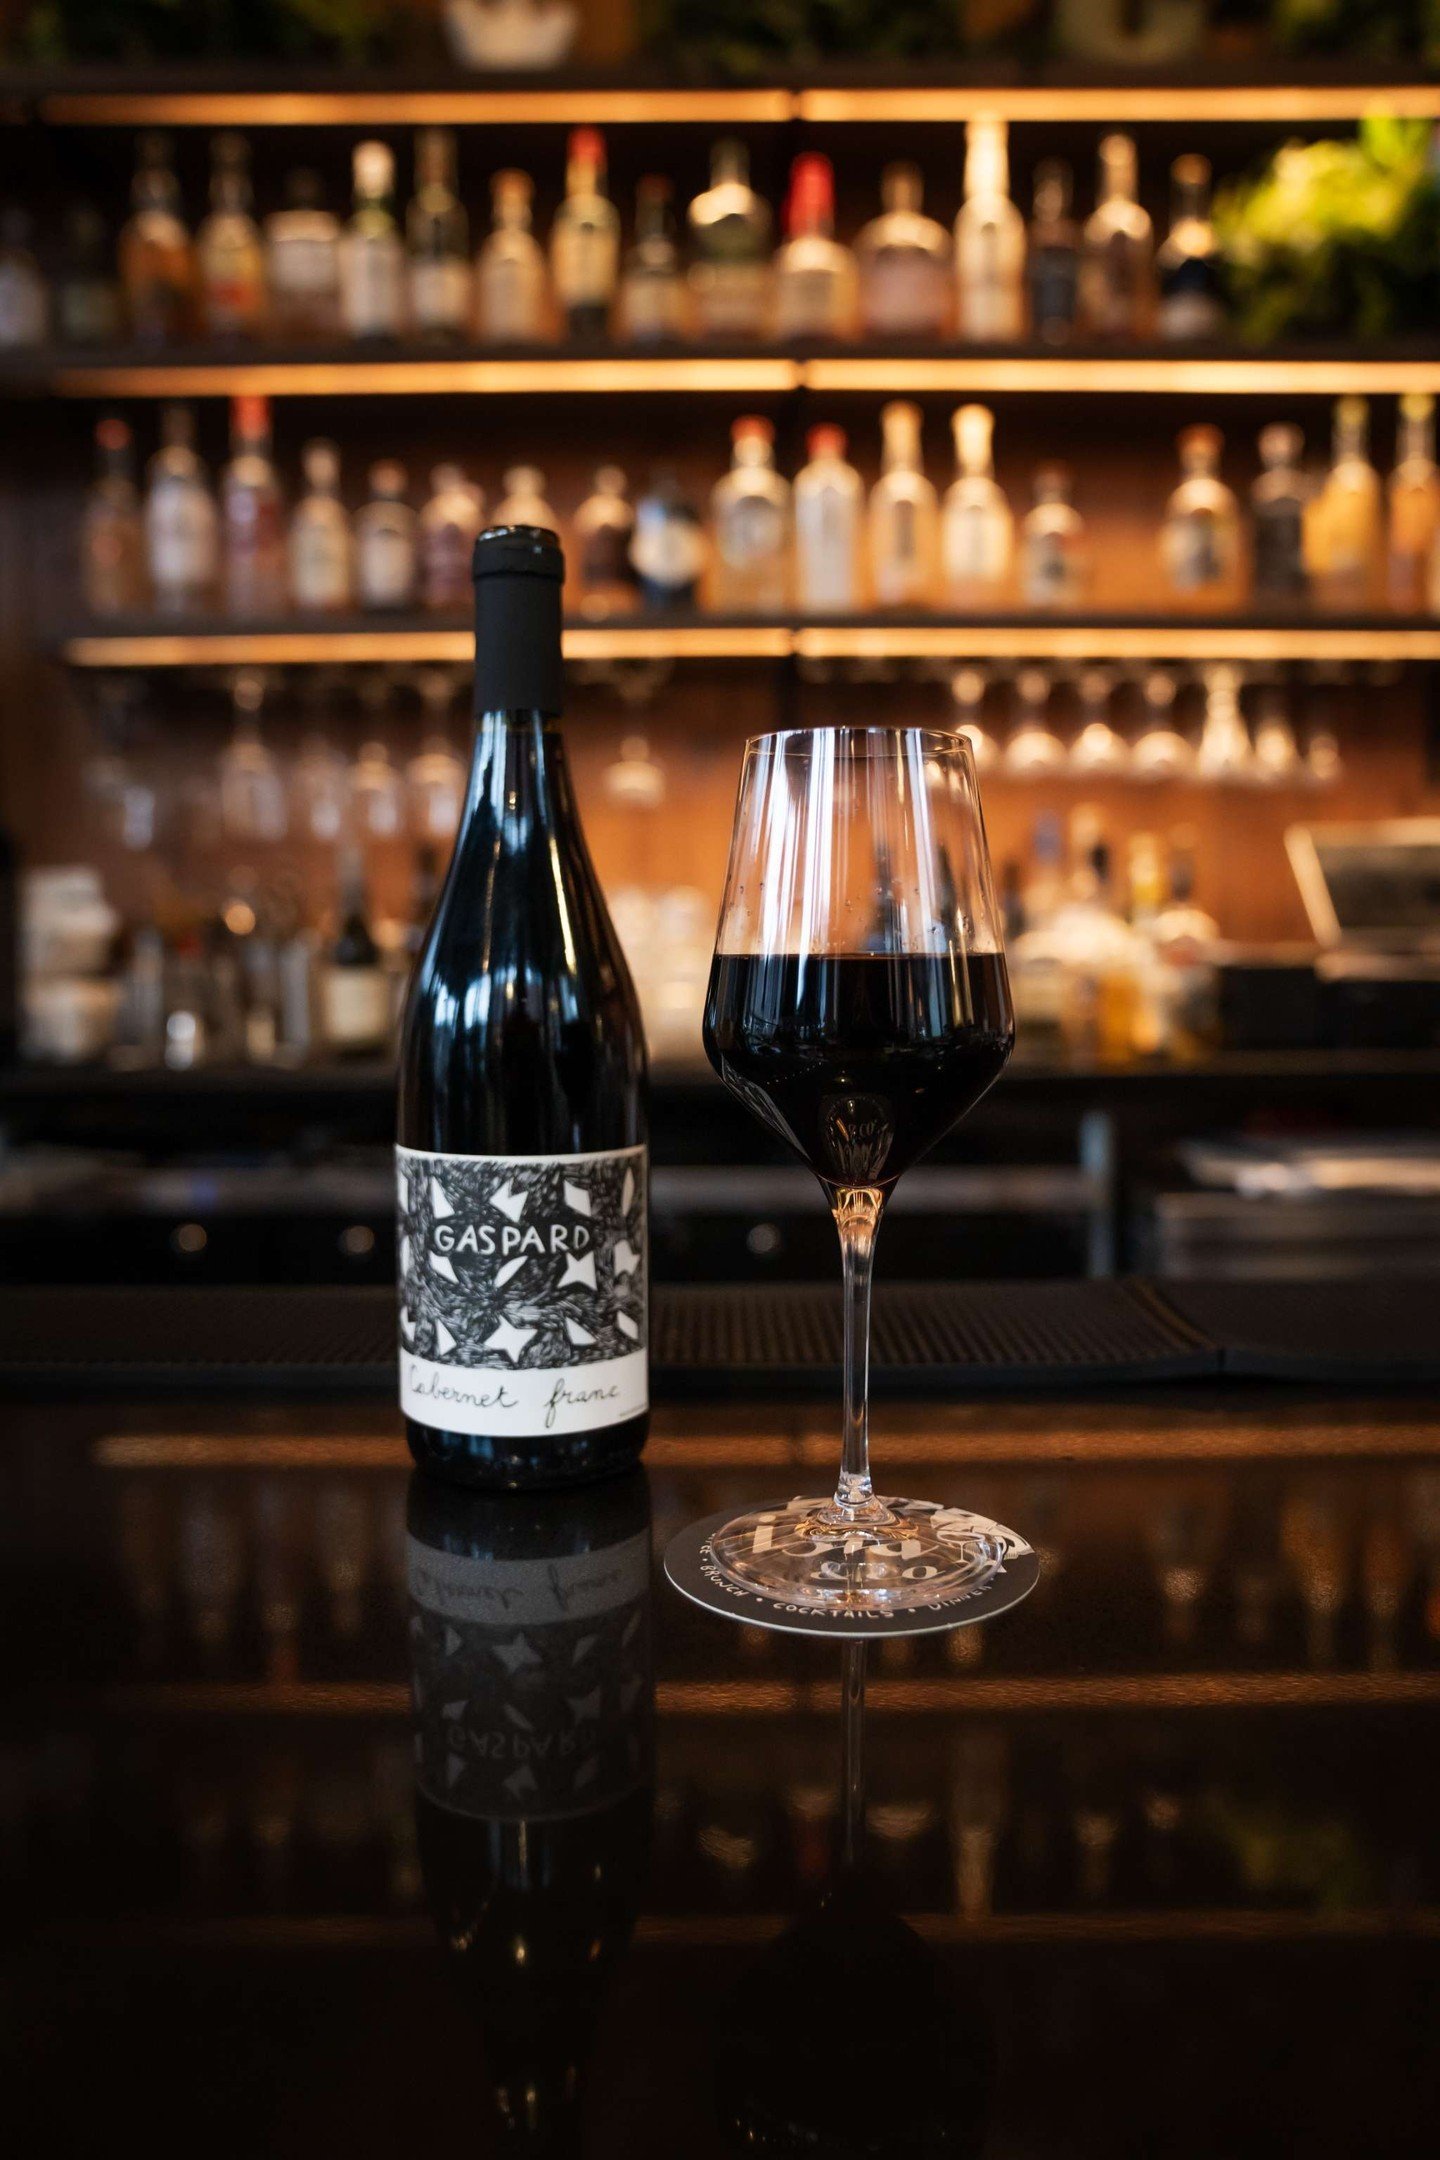 Wednesdays = half off all bottled wines. Come try this Gaspard Cabernet Franc that instantly entices you with its smooth tannins and dark fruit flavors mingled with spicy / earthy undertones. Enjoy lightly chilled, on its own or next to our OG Burger